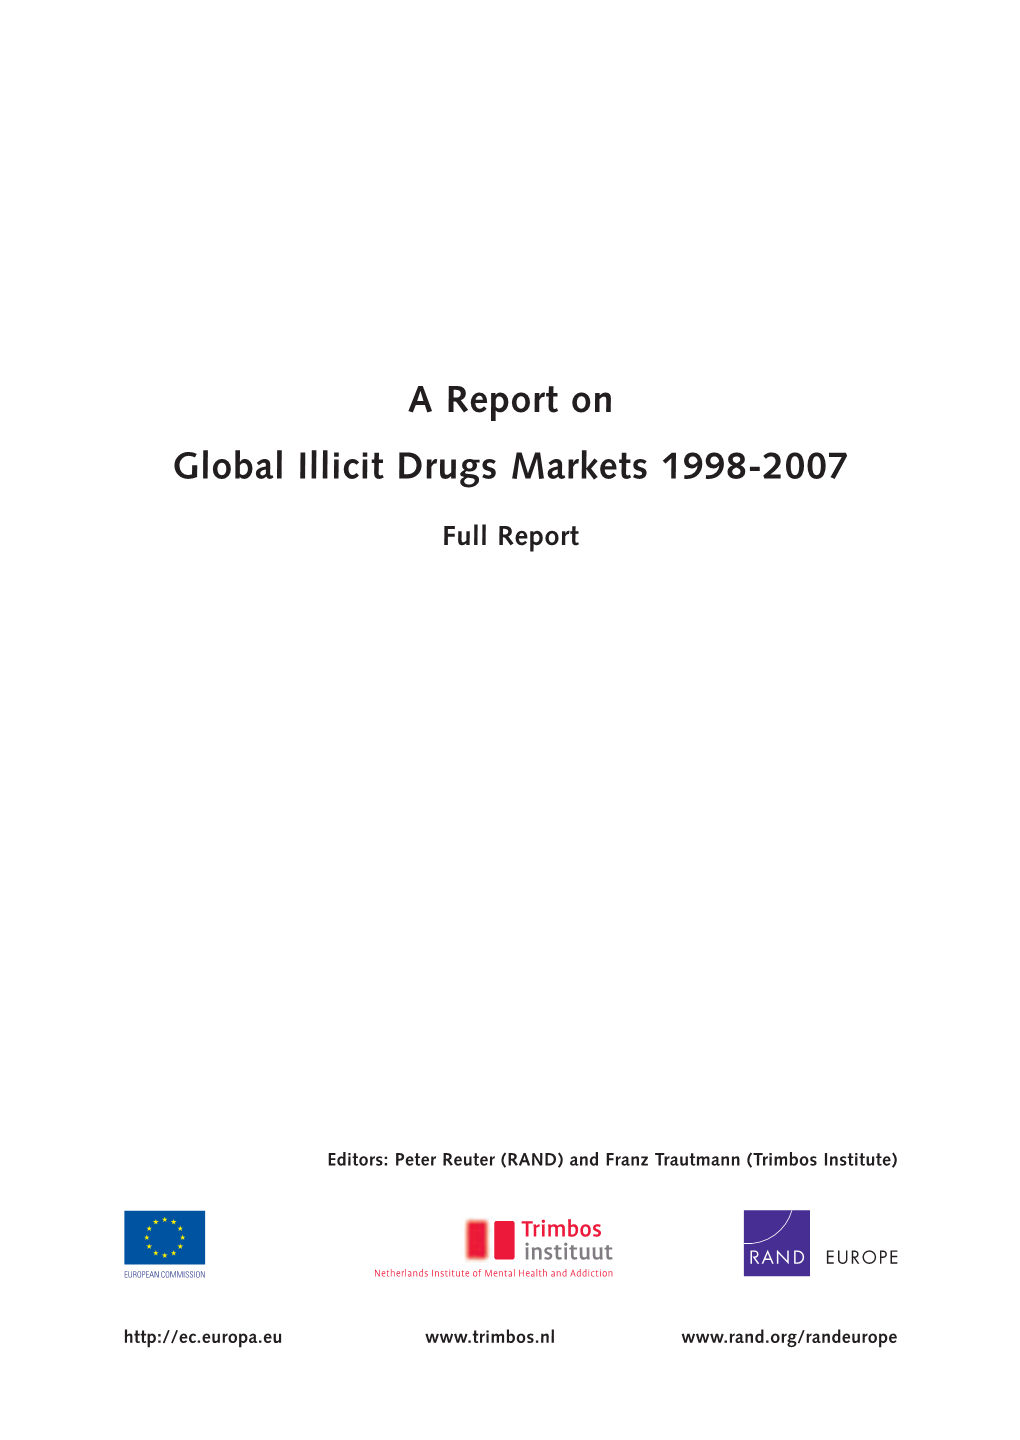 A Report on Global Illicit Drugs Markets 1998-2007